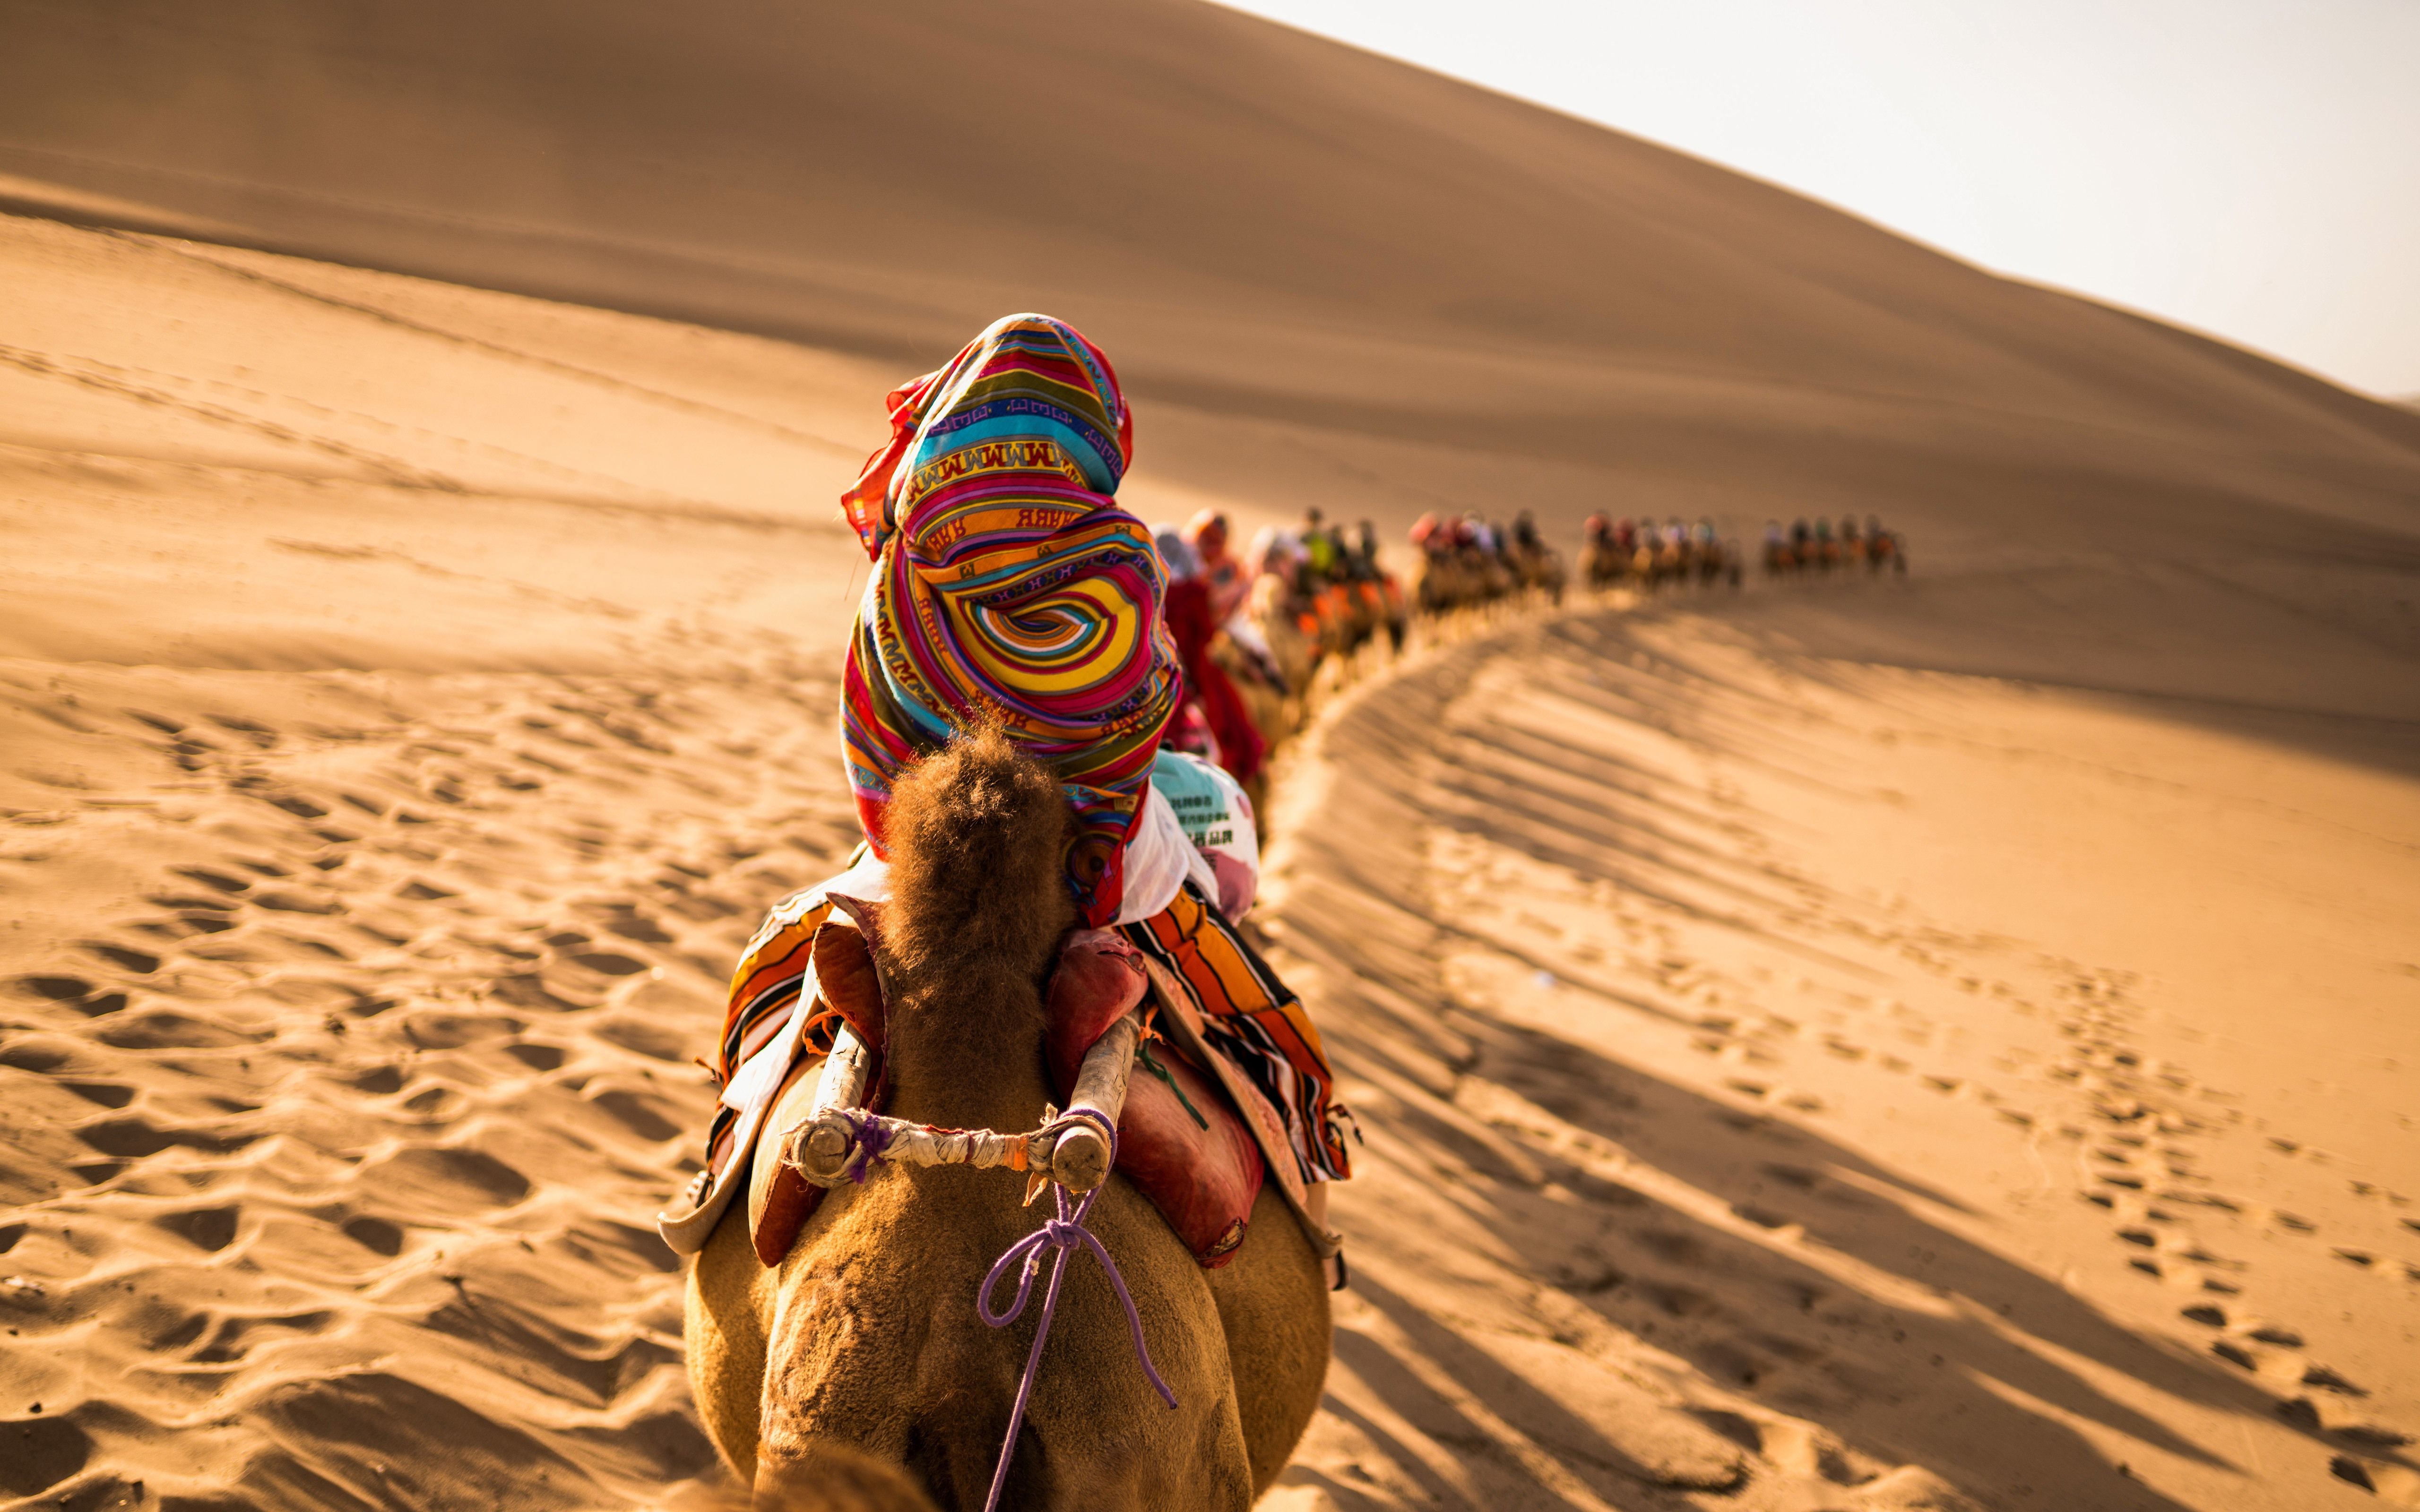 Traveling along the silk road in the desert on camels